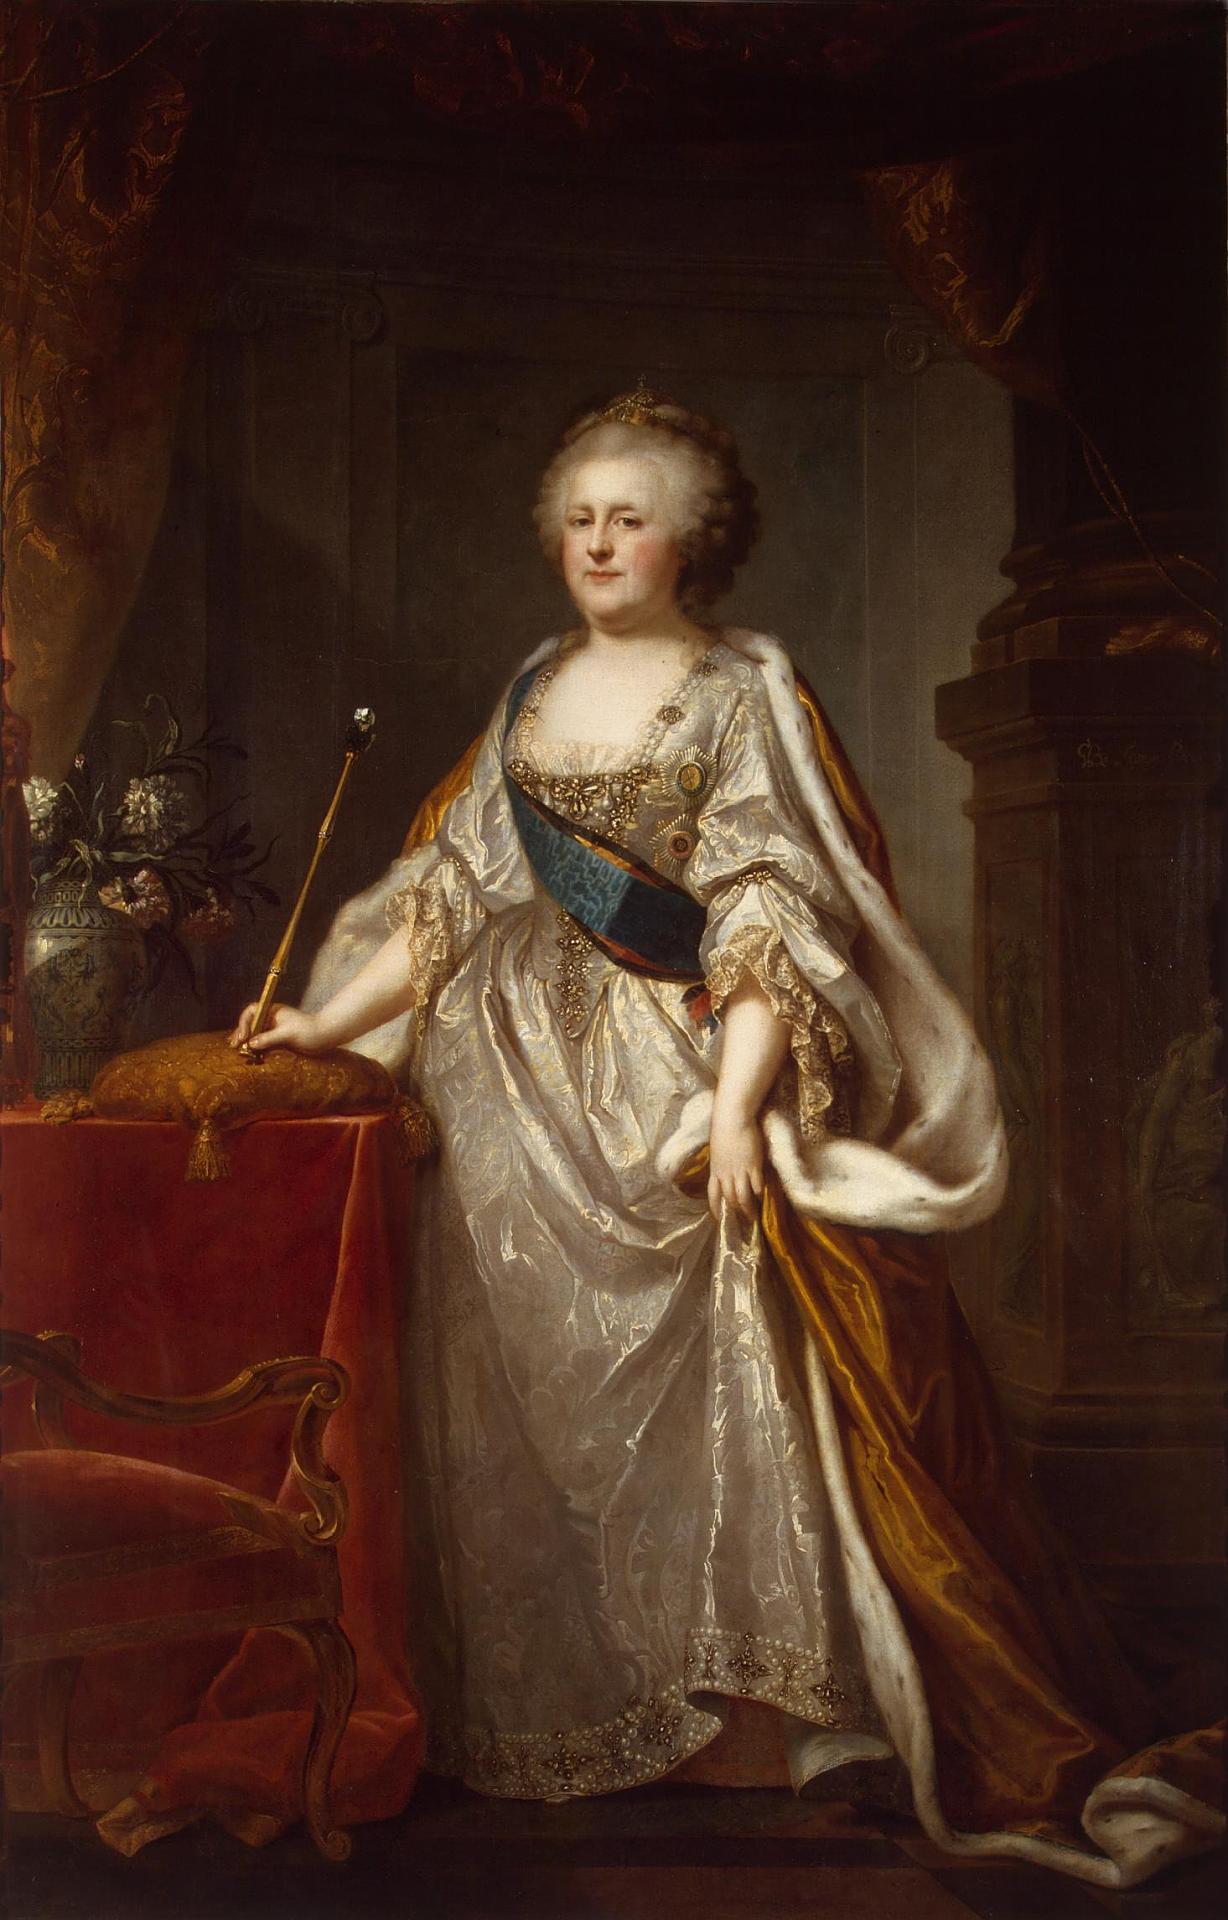 Lampi, Johann Baptist, I. Portrait of Catherine II, 1794. Source: courtesy of the State Hermitage Museum, St. Petersburg